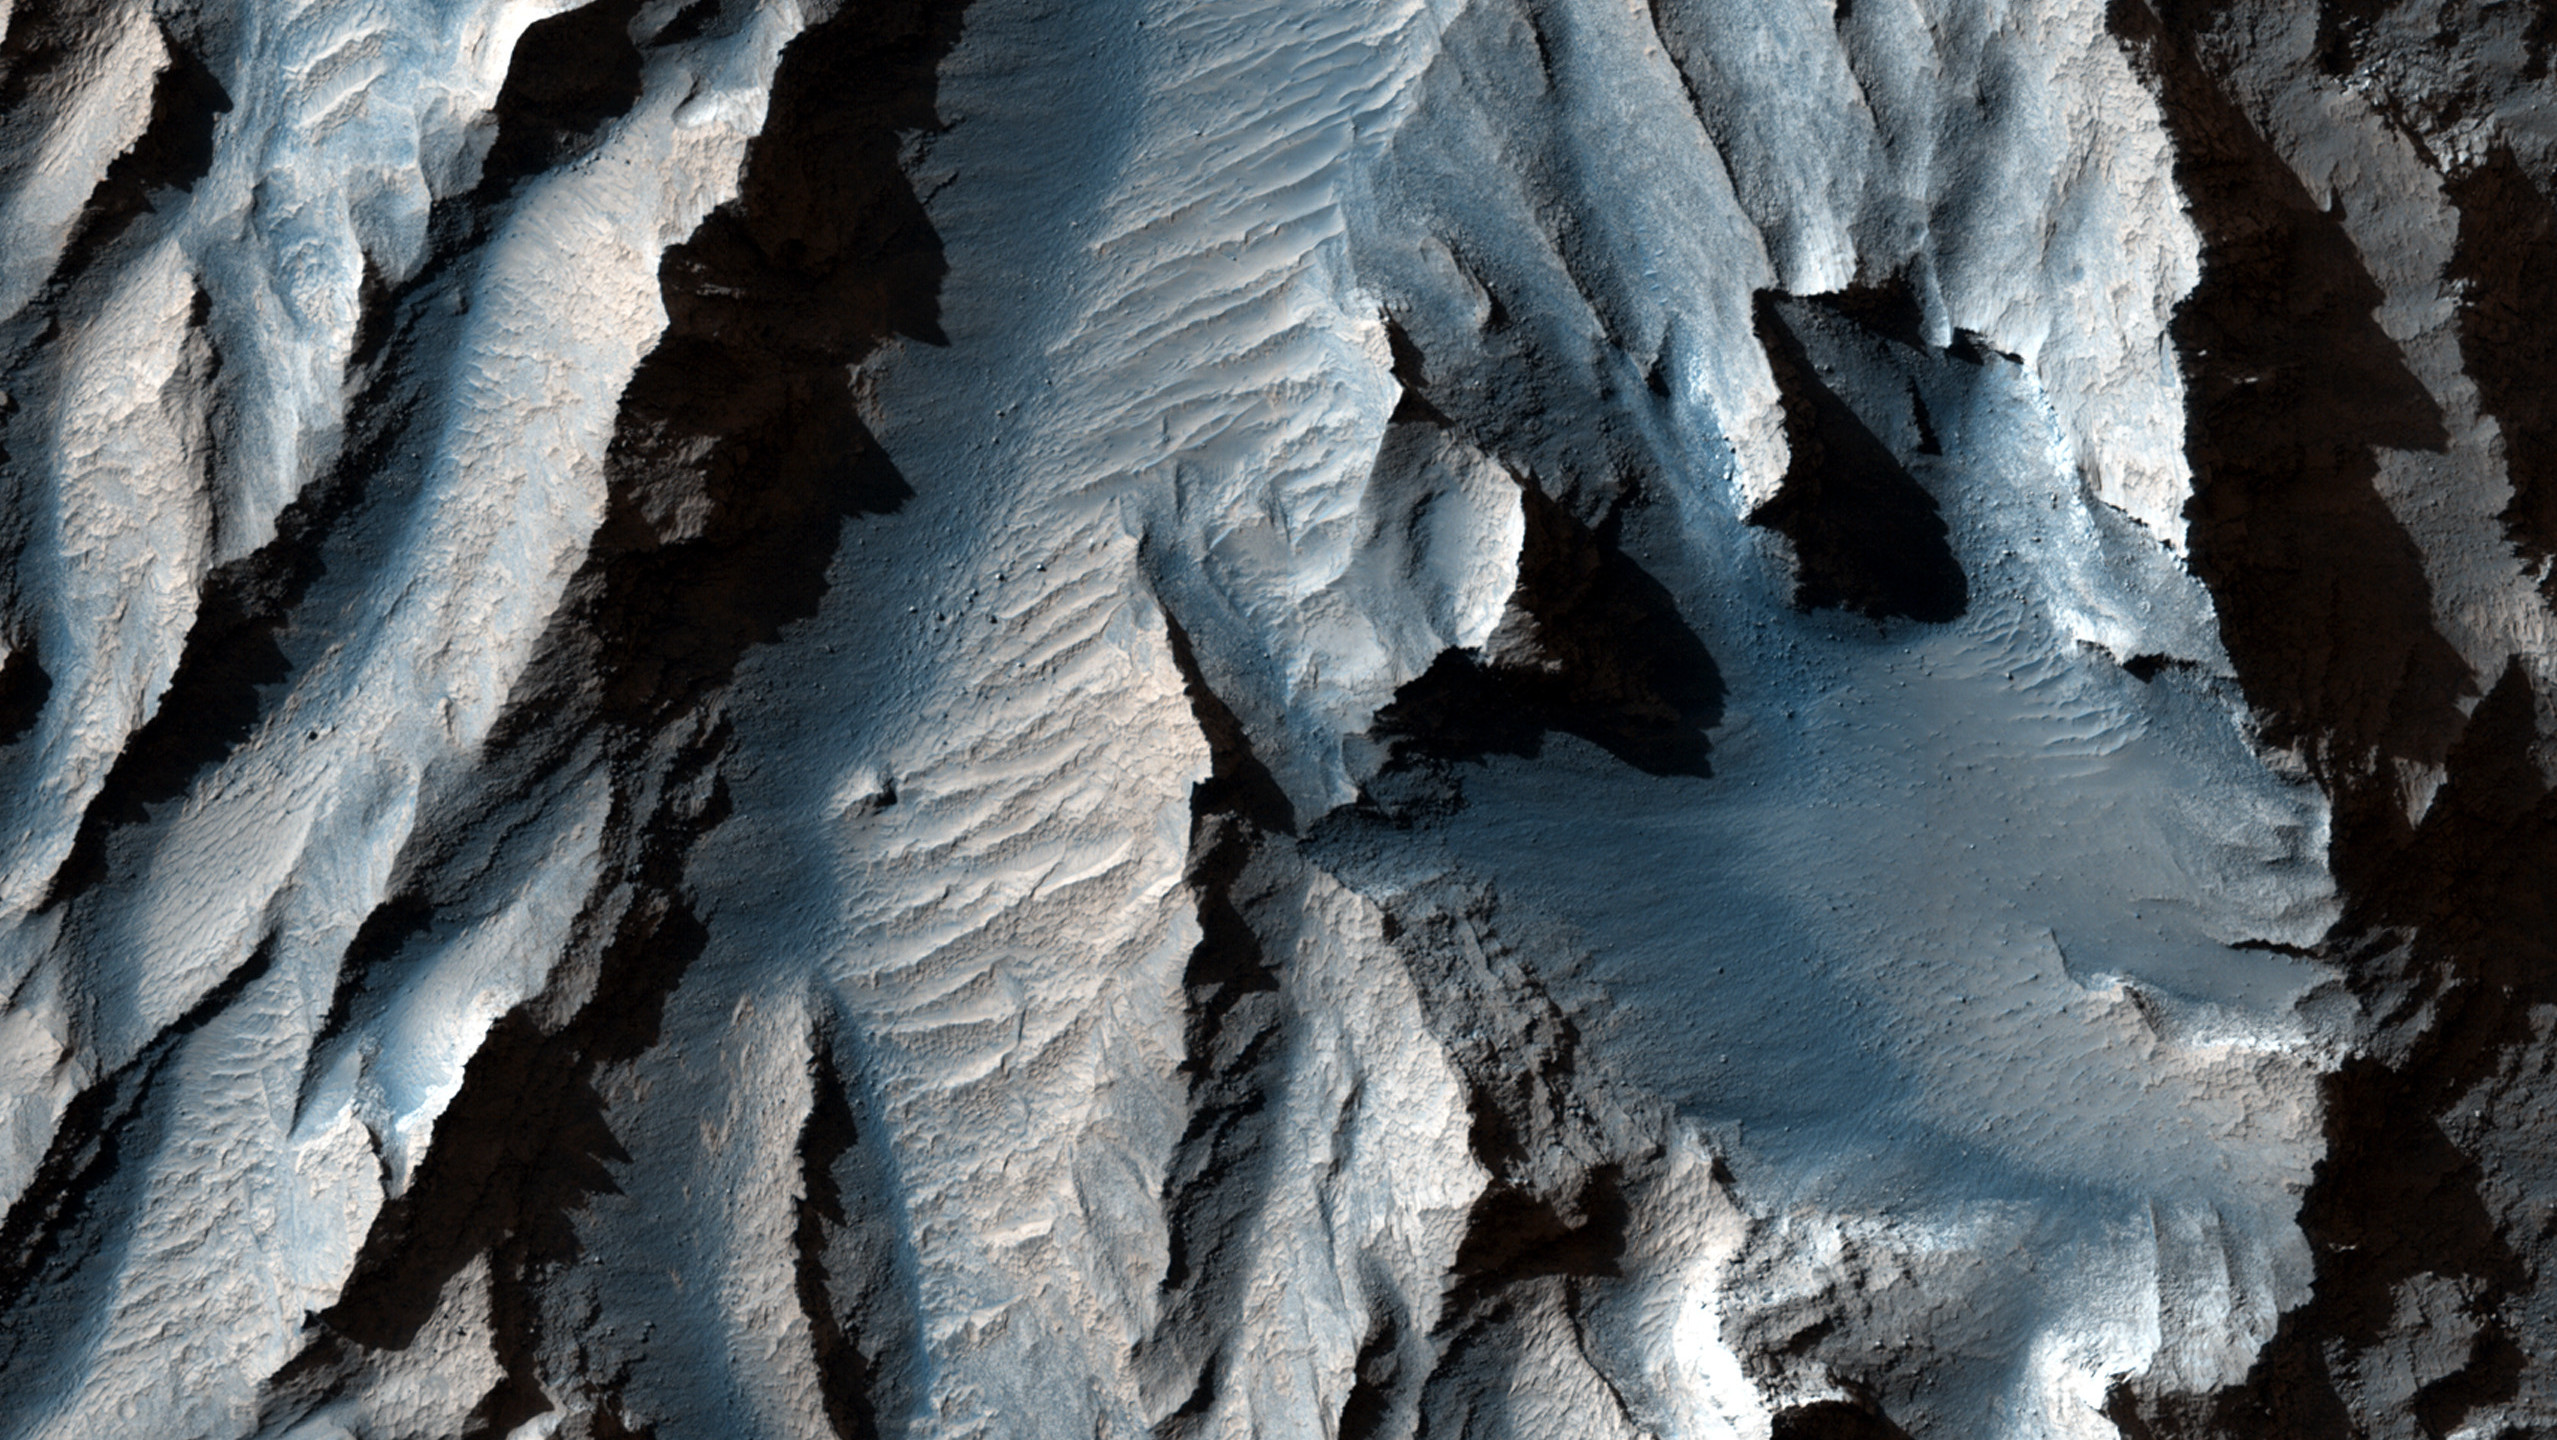 Feast Your Eyes on New Photos of the ‘Grand Canyon of Mars’